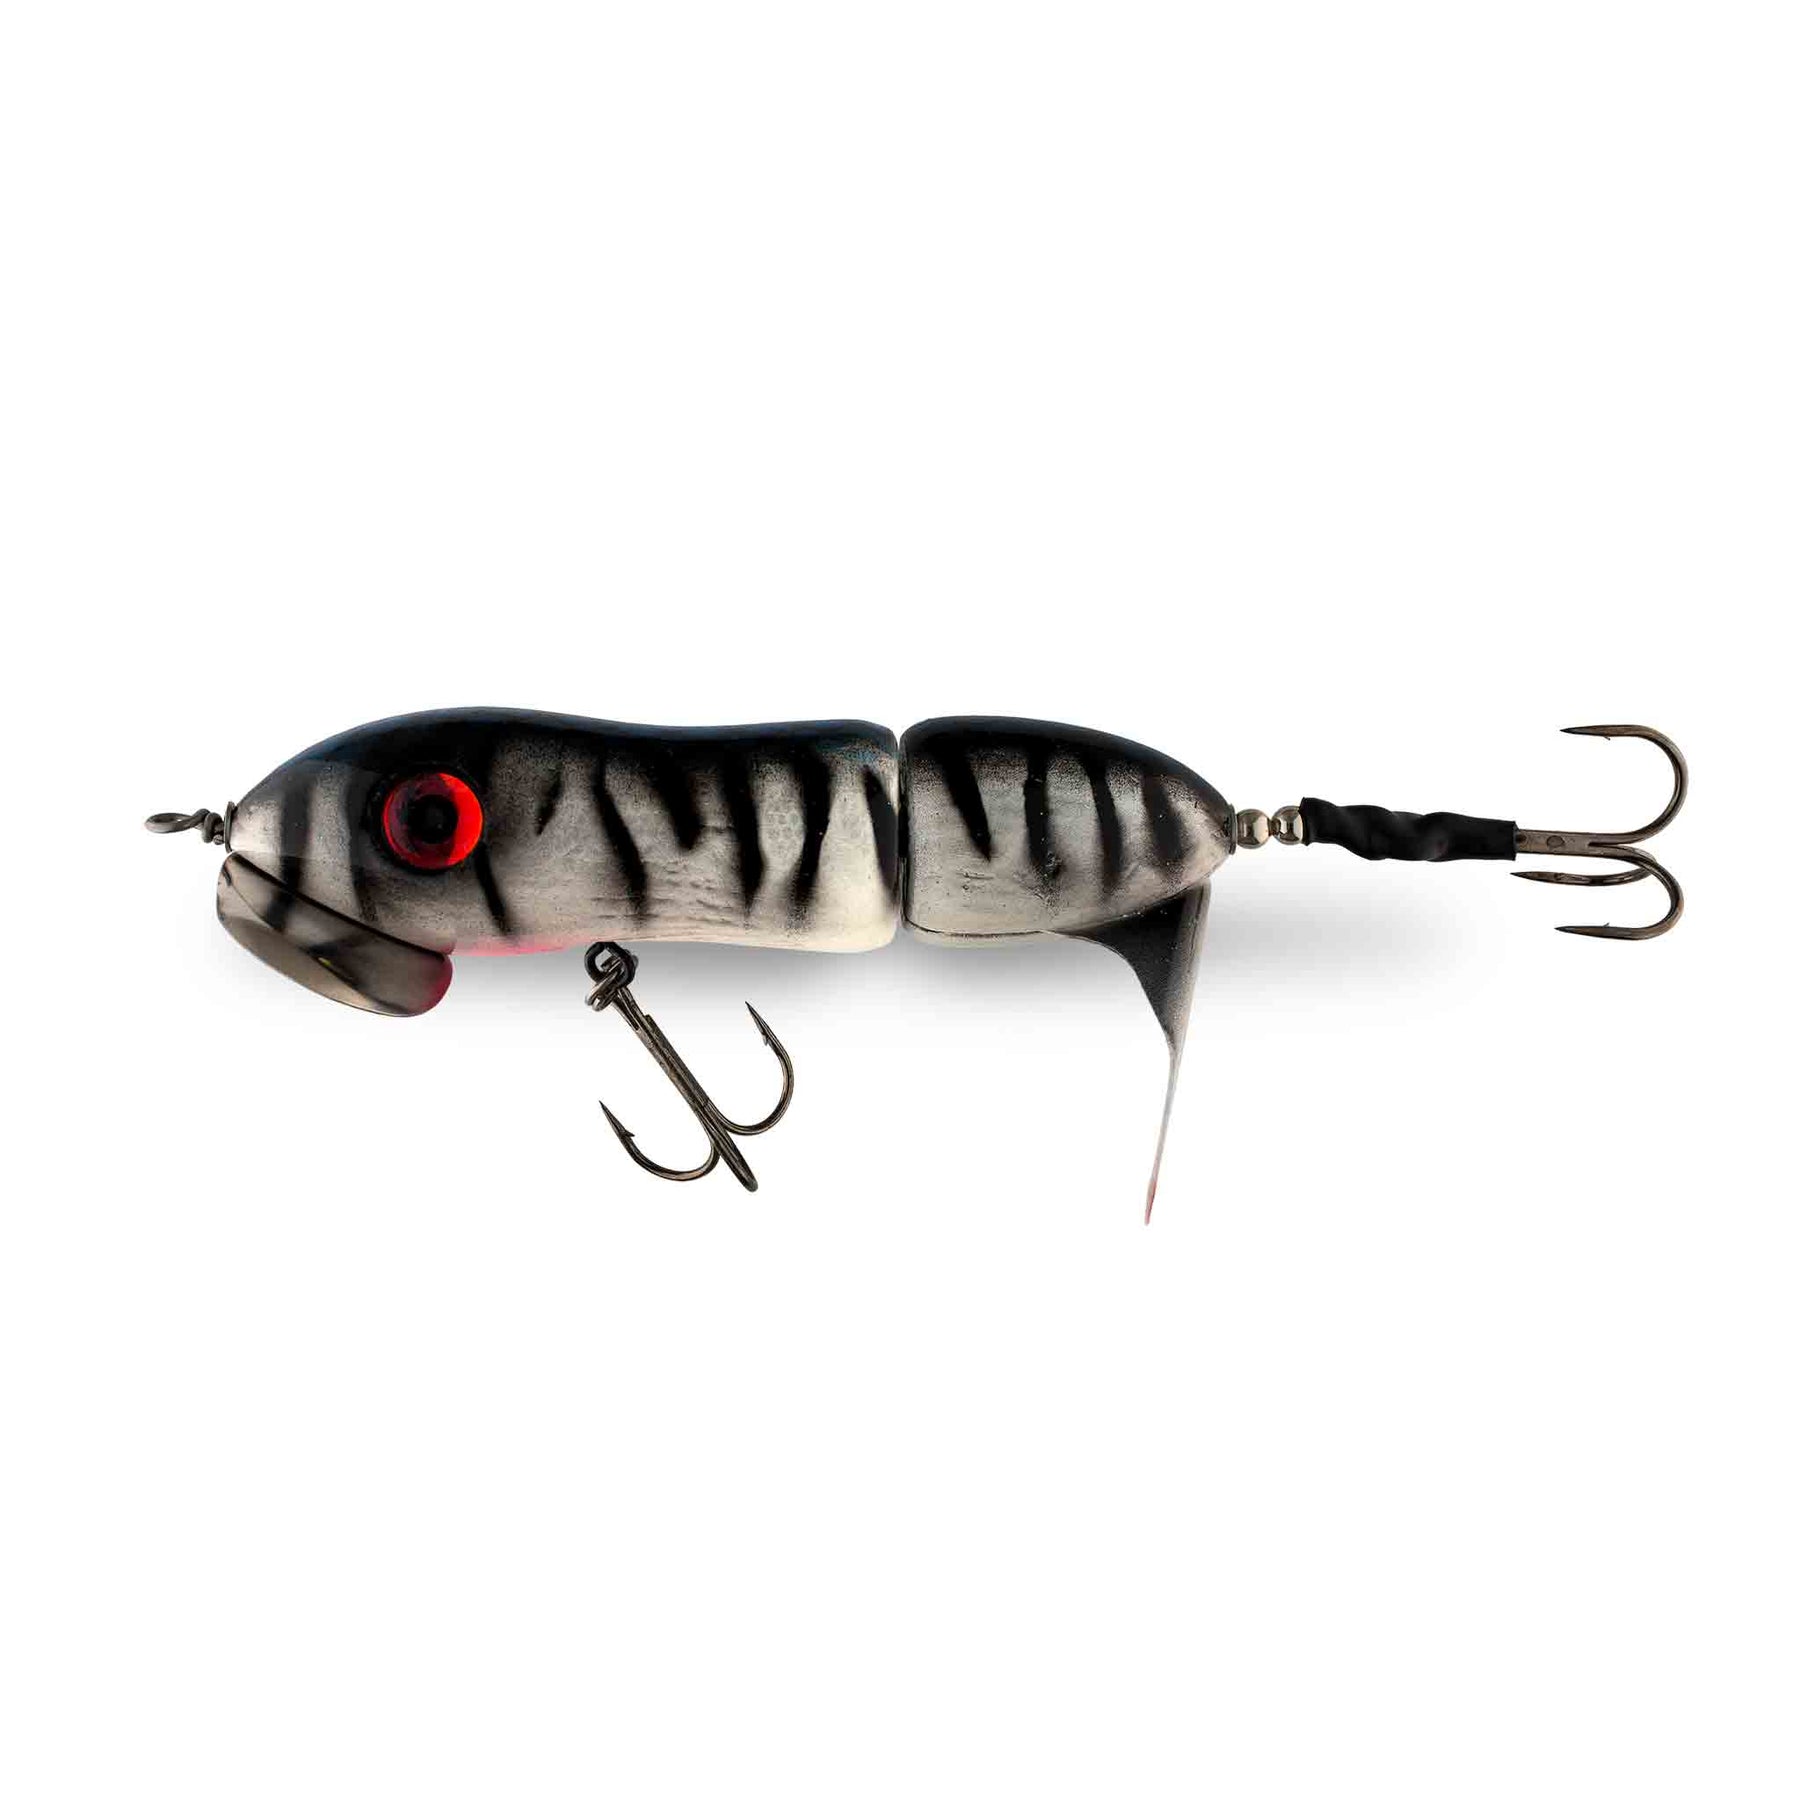 View of Topwater Big Mama Obnoxious "B" Propbait Charged Cisco available at EZOKO Pike and Musky Shop